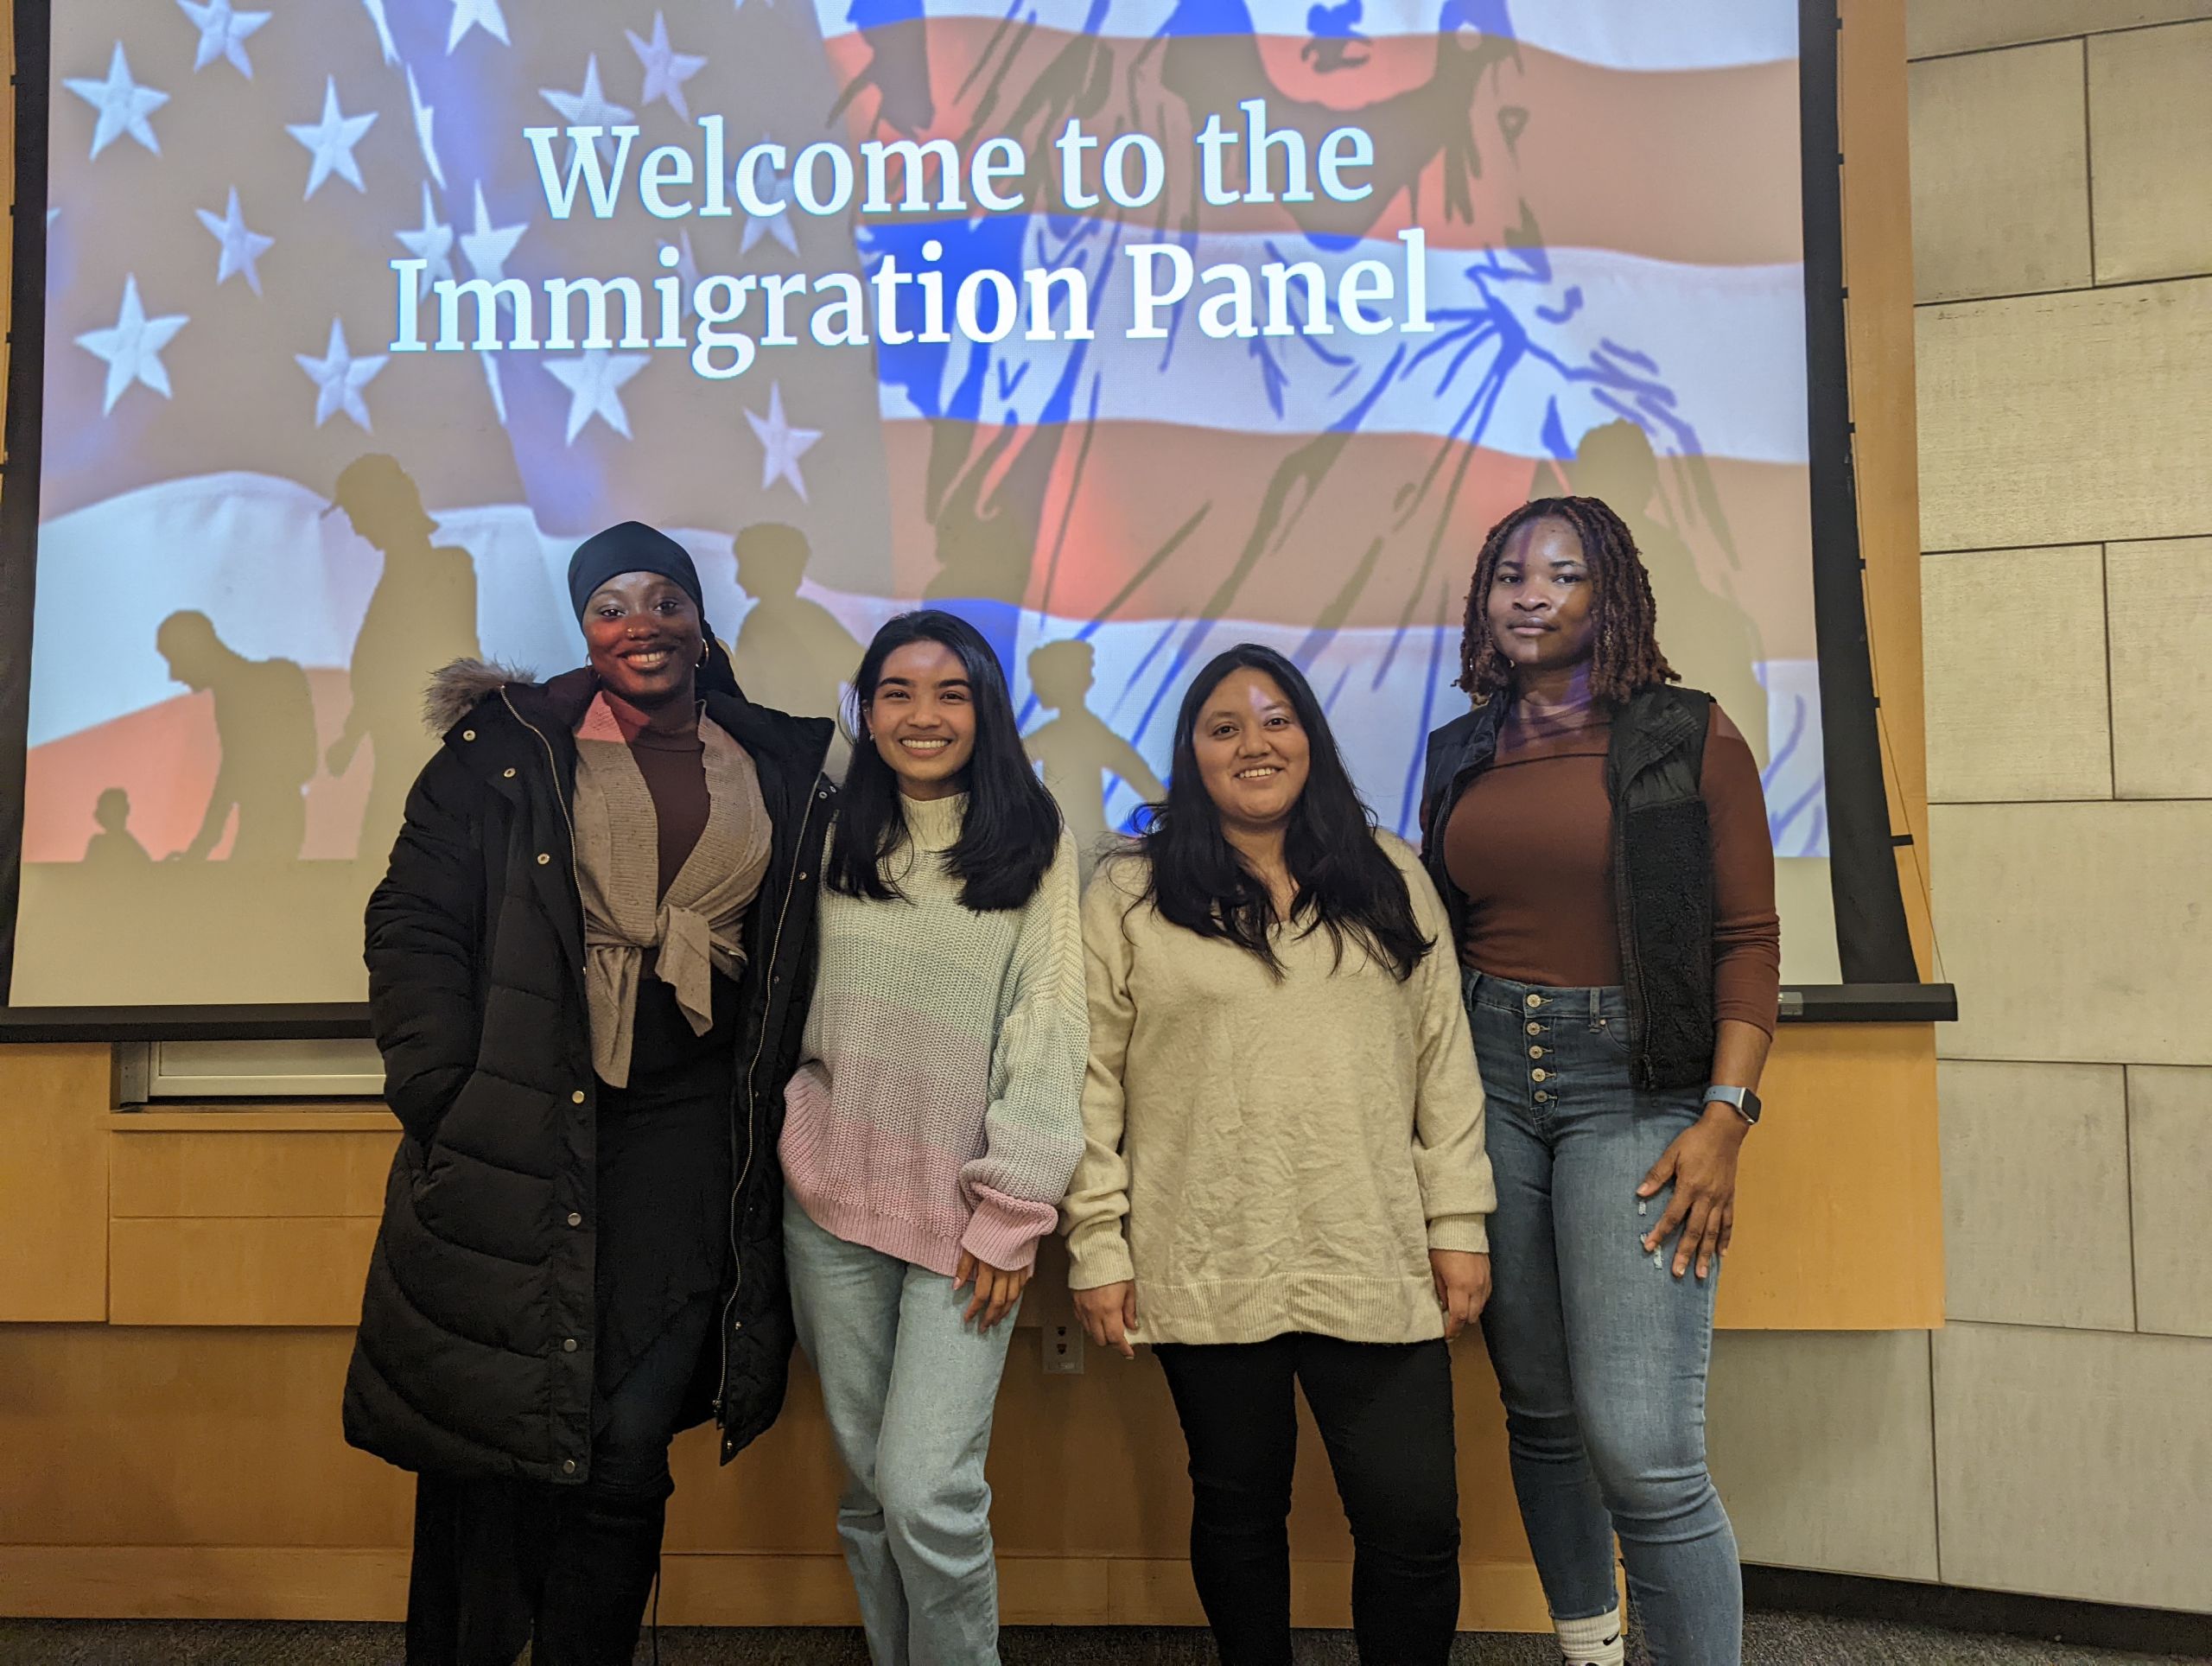 Cabrini's Immigration Panel. Photo by Jedidah Antwi.